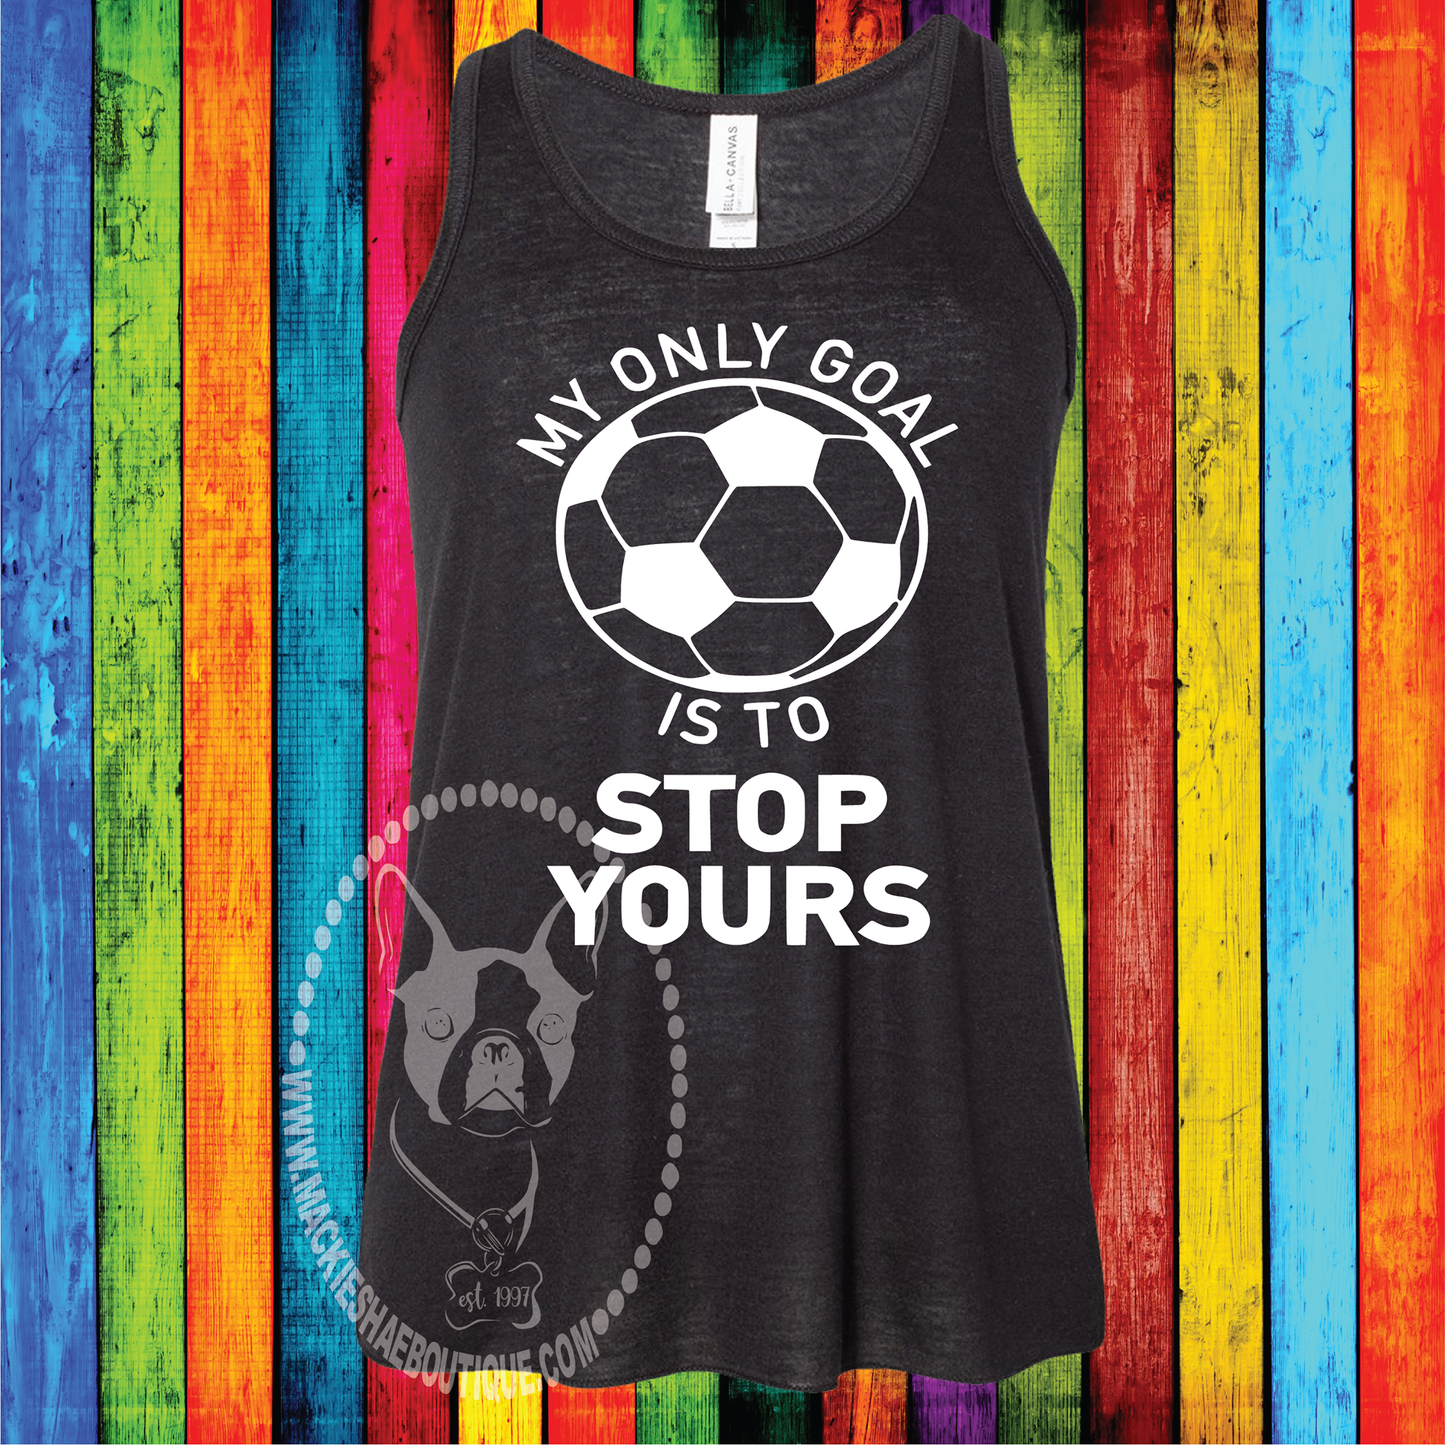 My Only Goal is to Stop Yours Soccer Custom Shirt for Kids, Racerback Tank